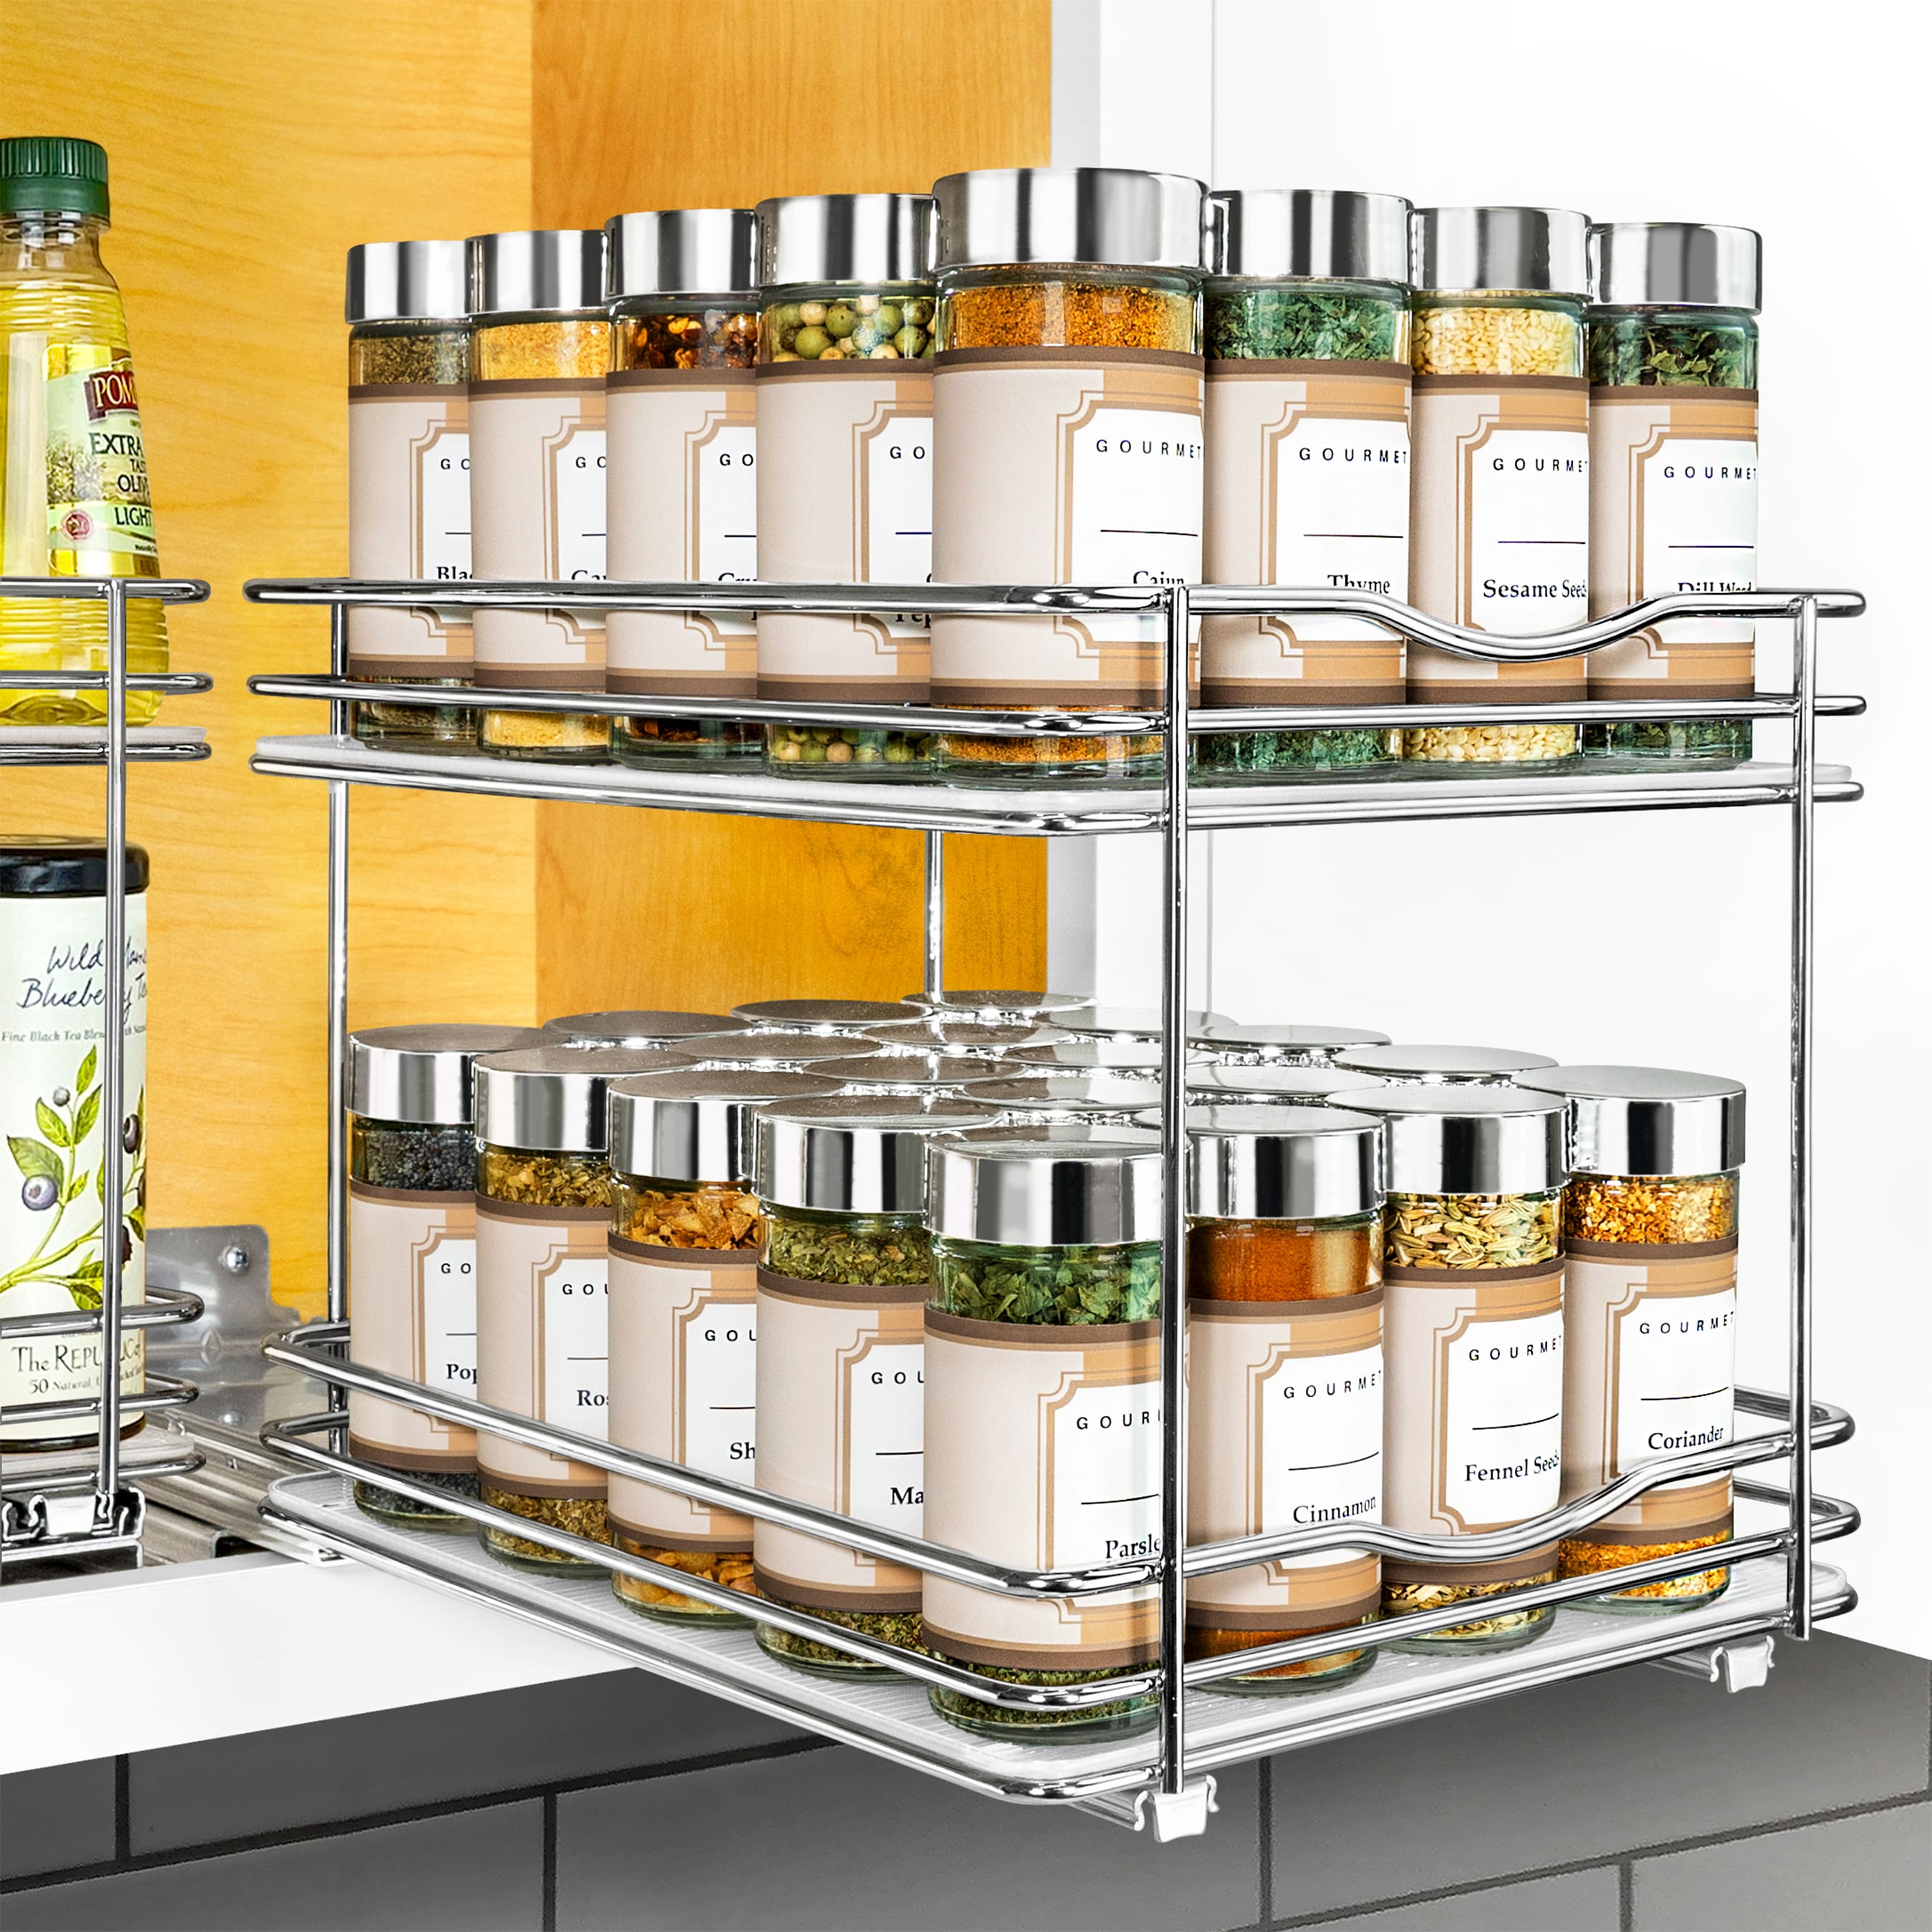 Spice rack Cabinet Organizers at